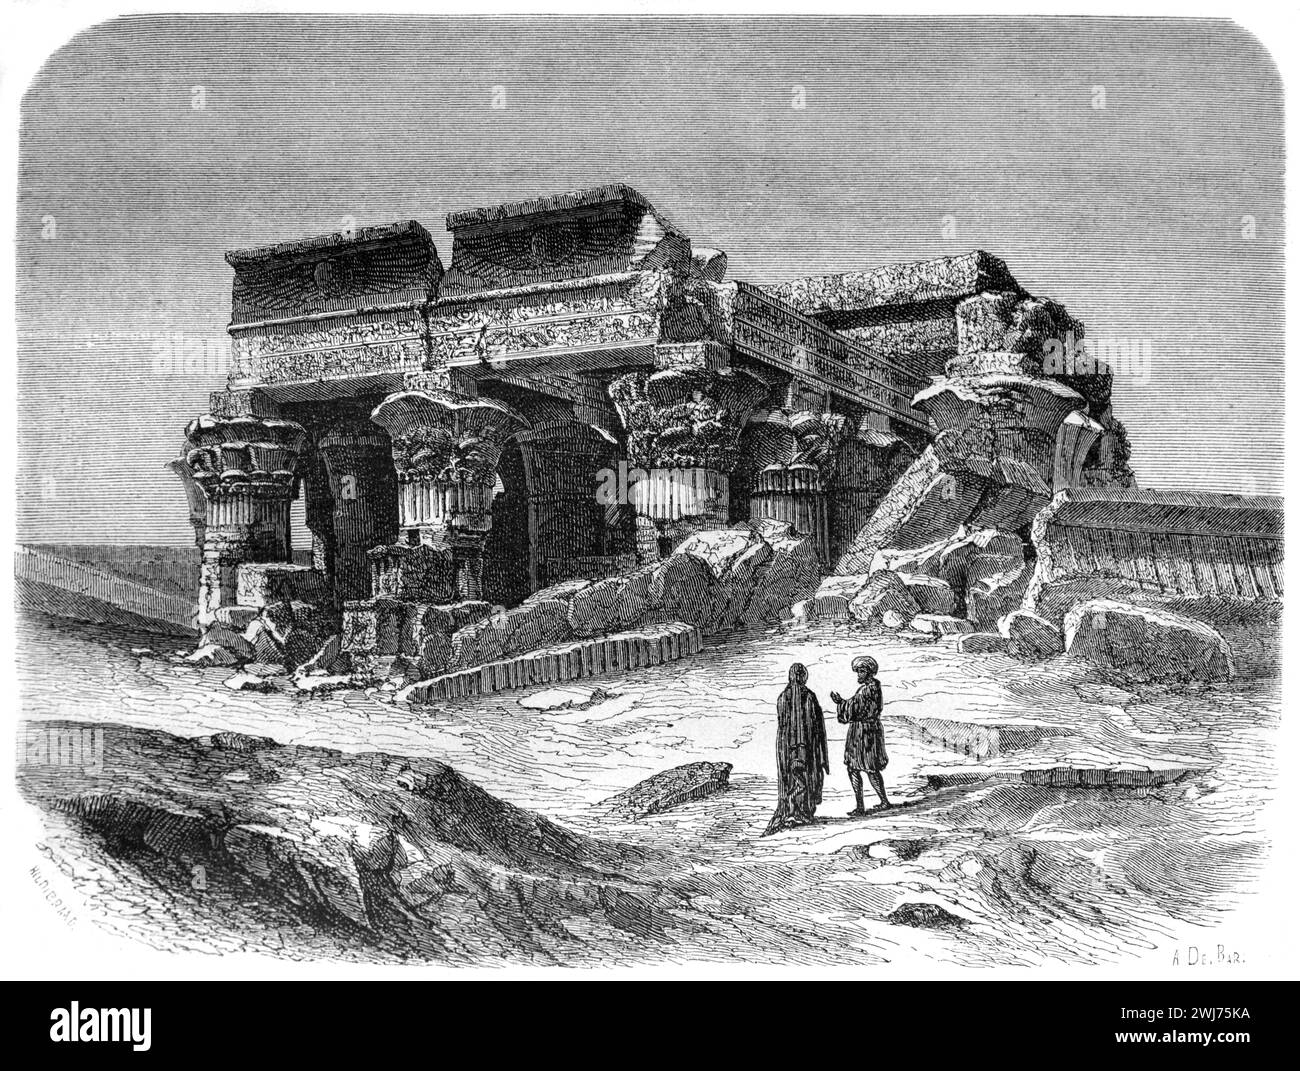 Ruins of the Temple of Kom Ombo (before reconstruction), an Ancient Double Egyptian Temple (180-47BC) in Kom Ombo, Aswan Govornate, Upper Egypt. Vintage or Historic Engraving or Illustration 1863 Stock Photo